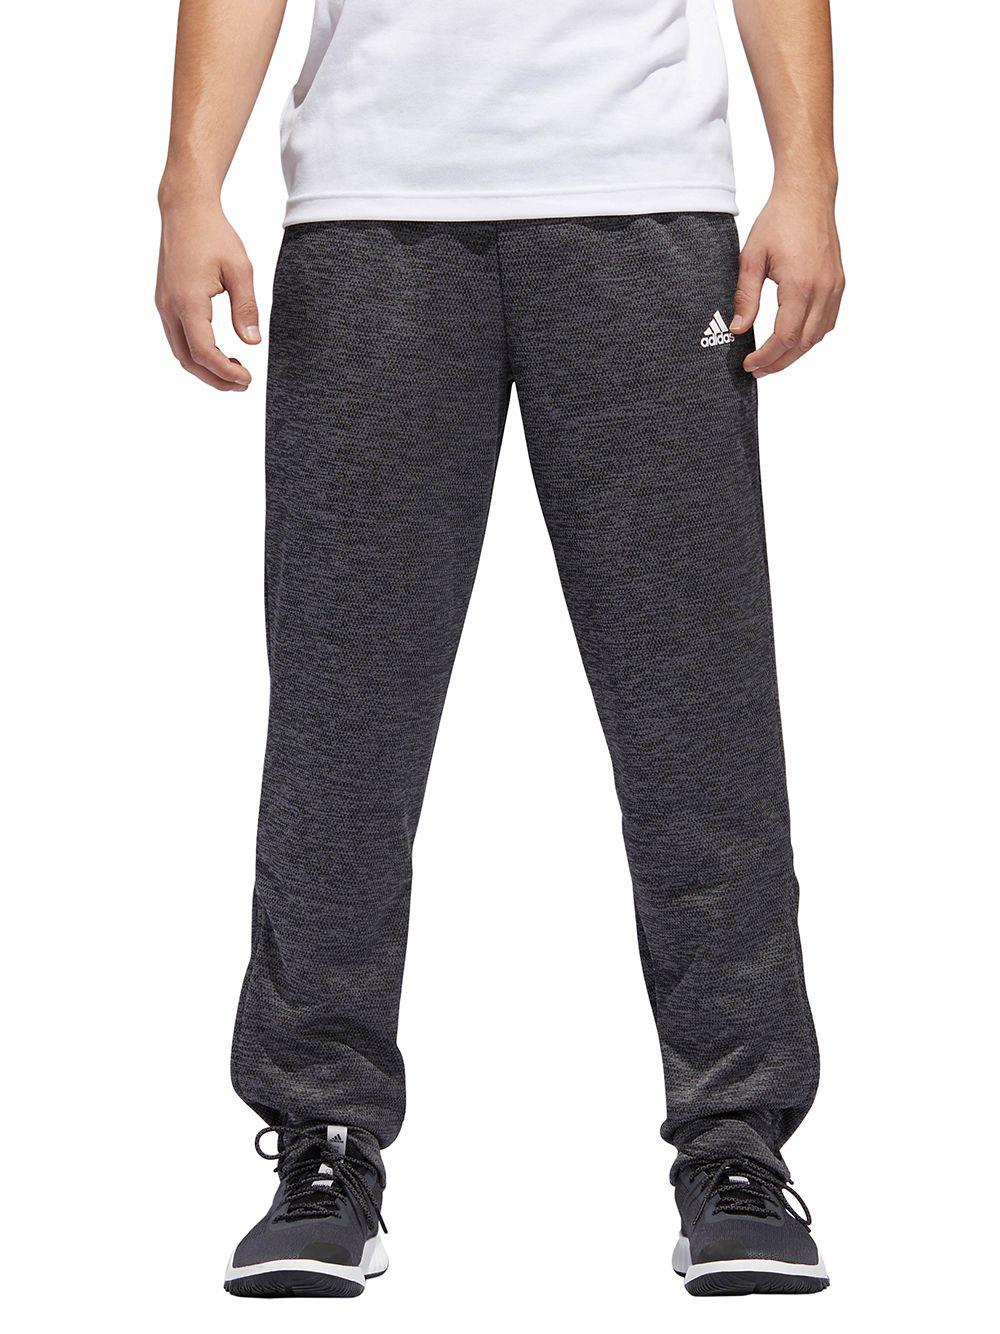 adidas Team Issue Sweatpants in Gray for Men - Lyst